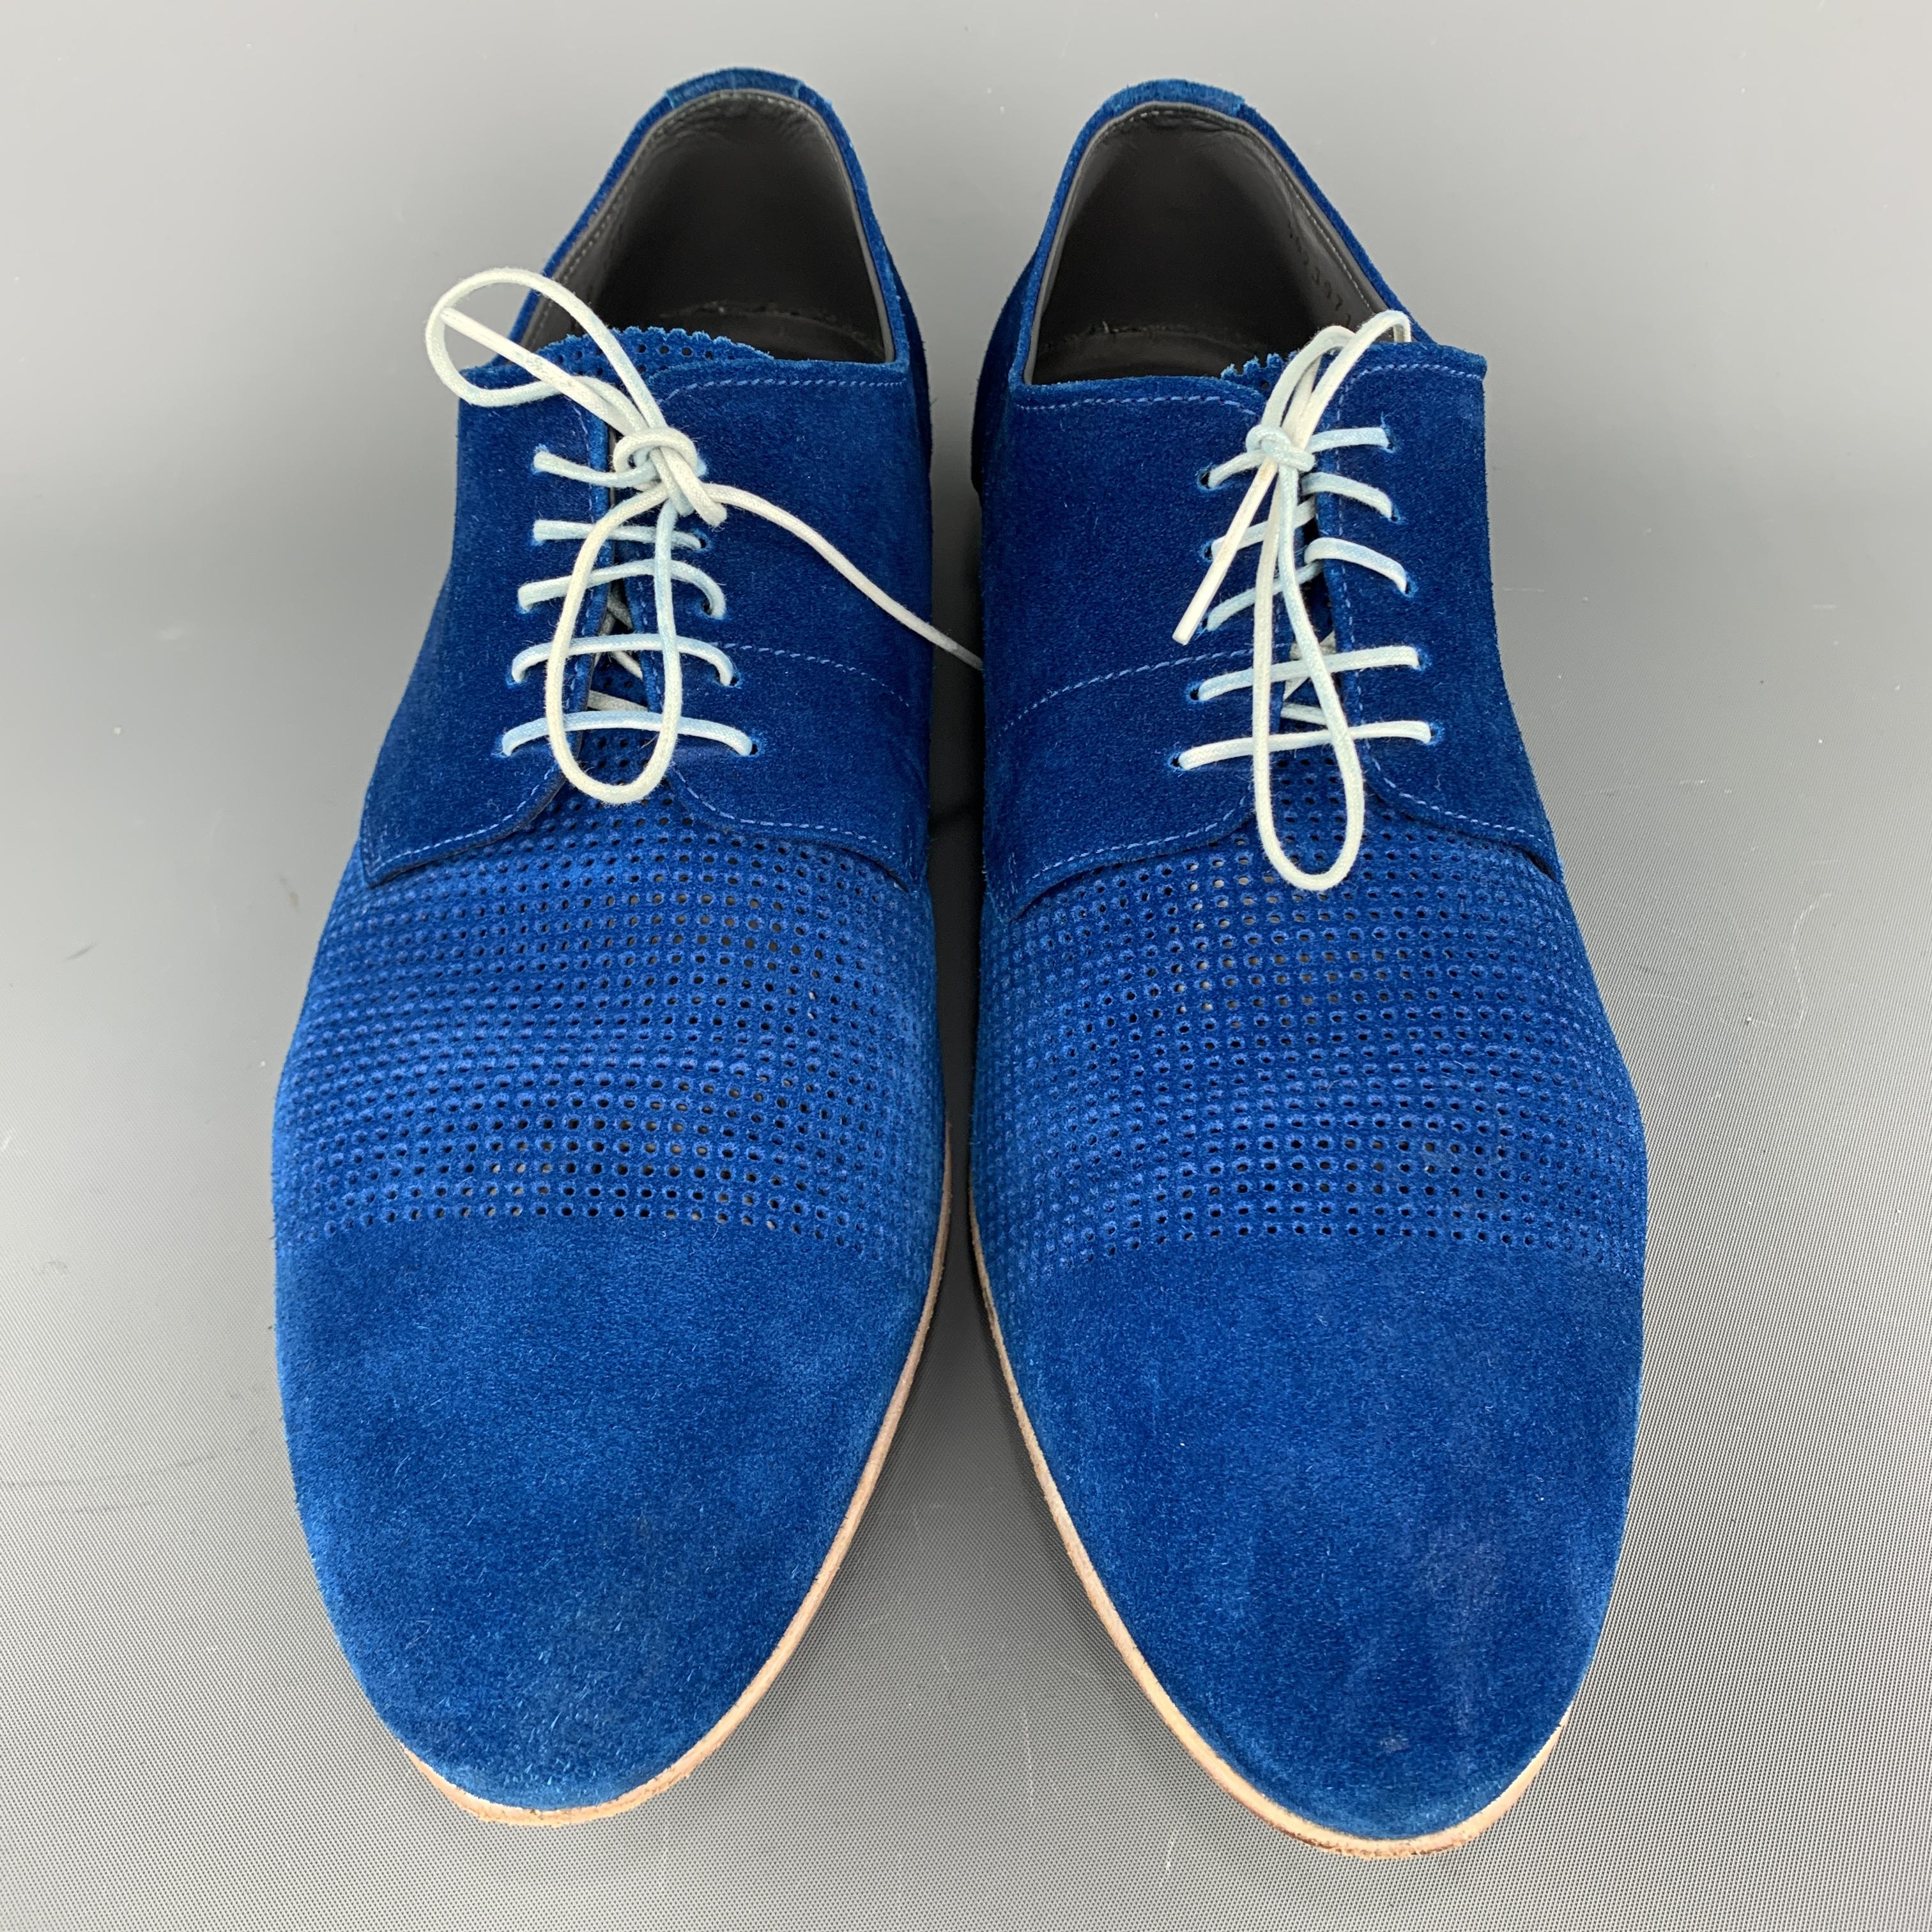 Men's HUGO BOSS Size 9.5 Blue Perforated Suede Pointed Lace Up